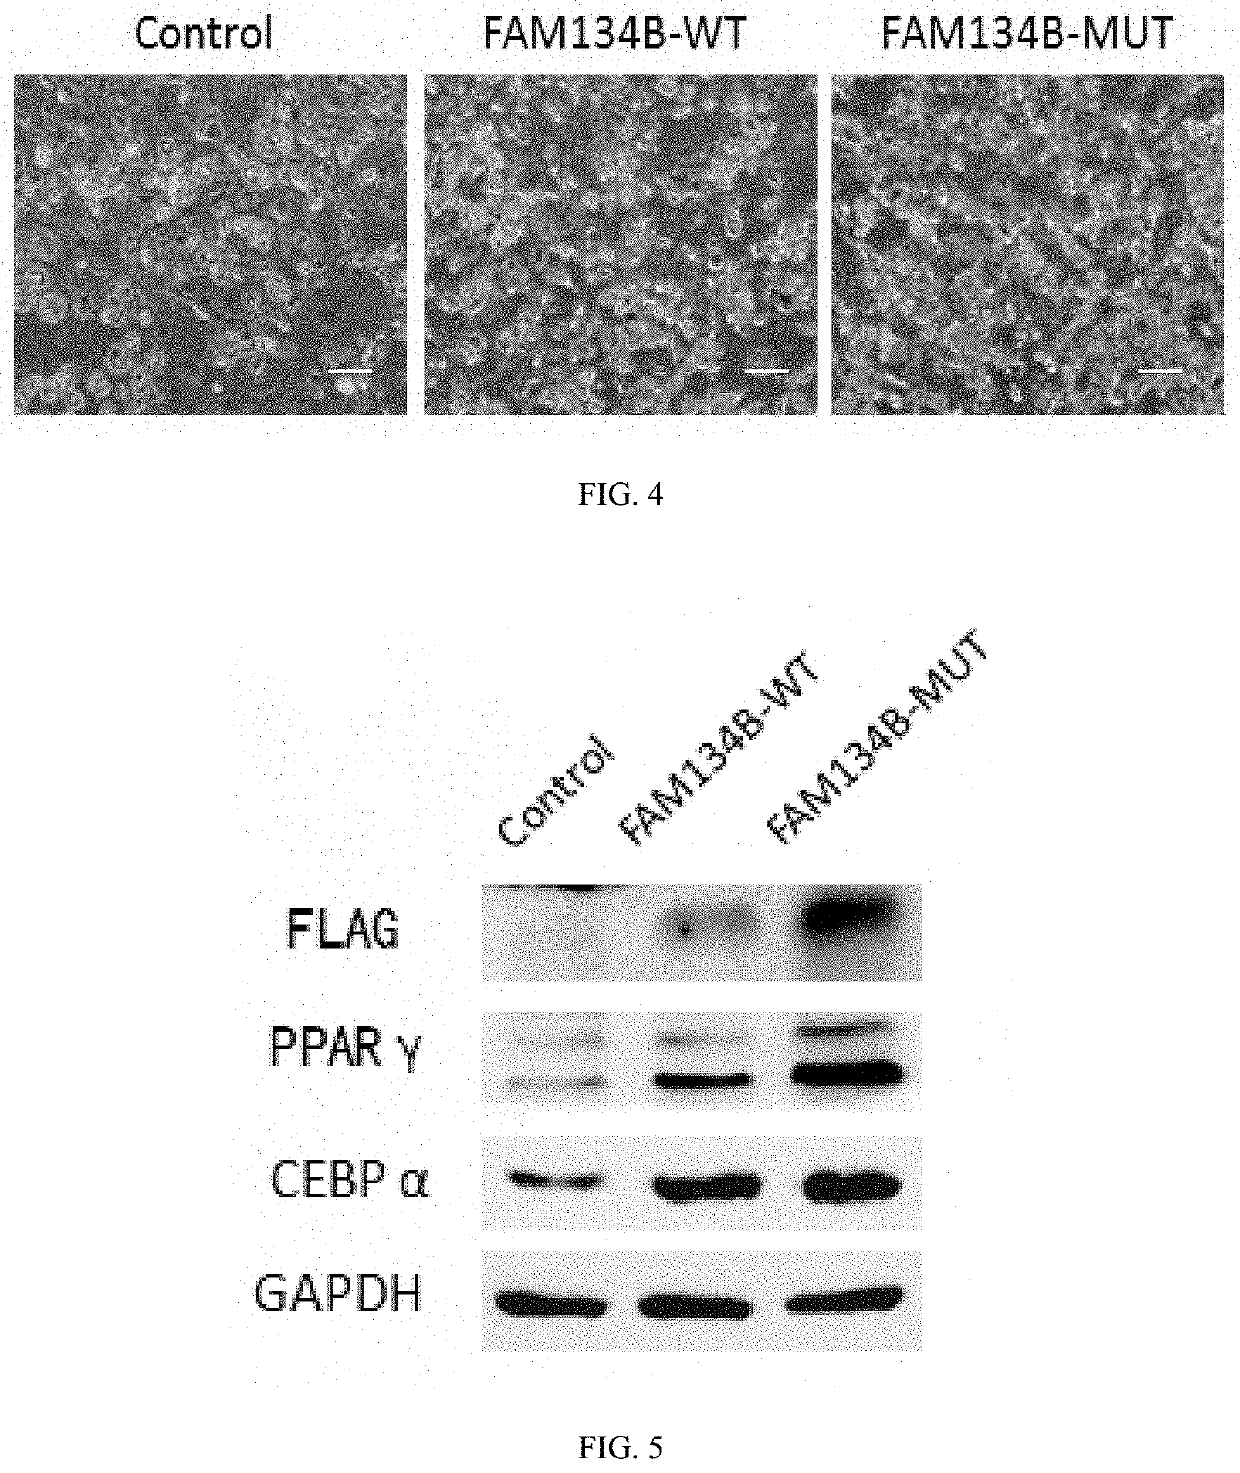 Identification, function and application of m6a methylation site in pig fat deposition-related fam134b mRNA